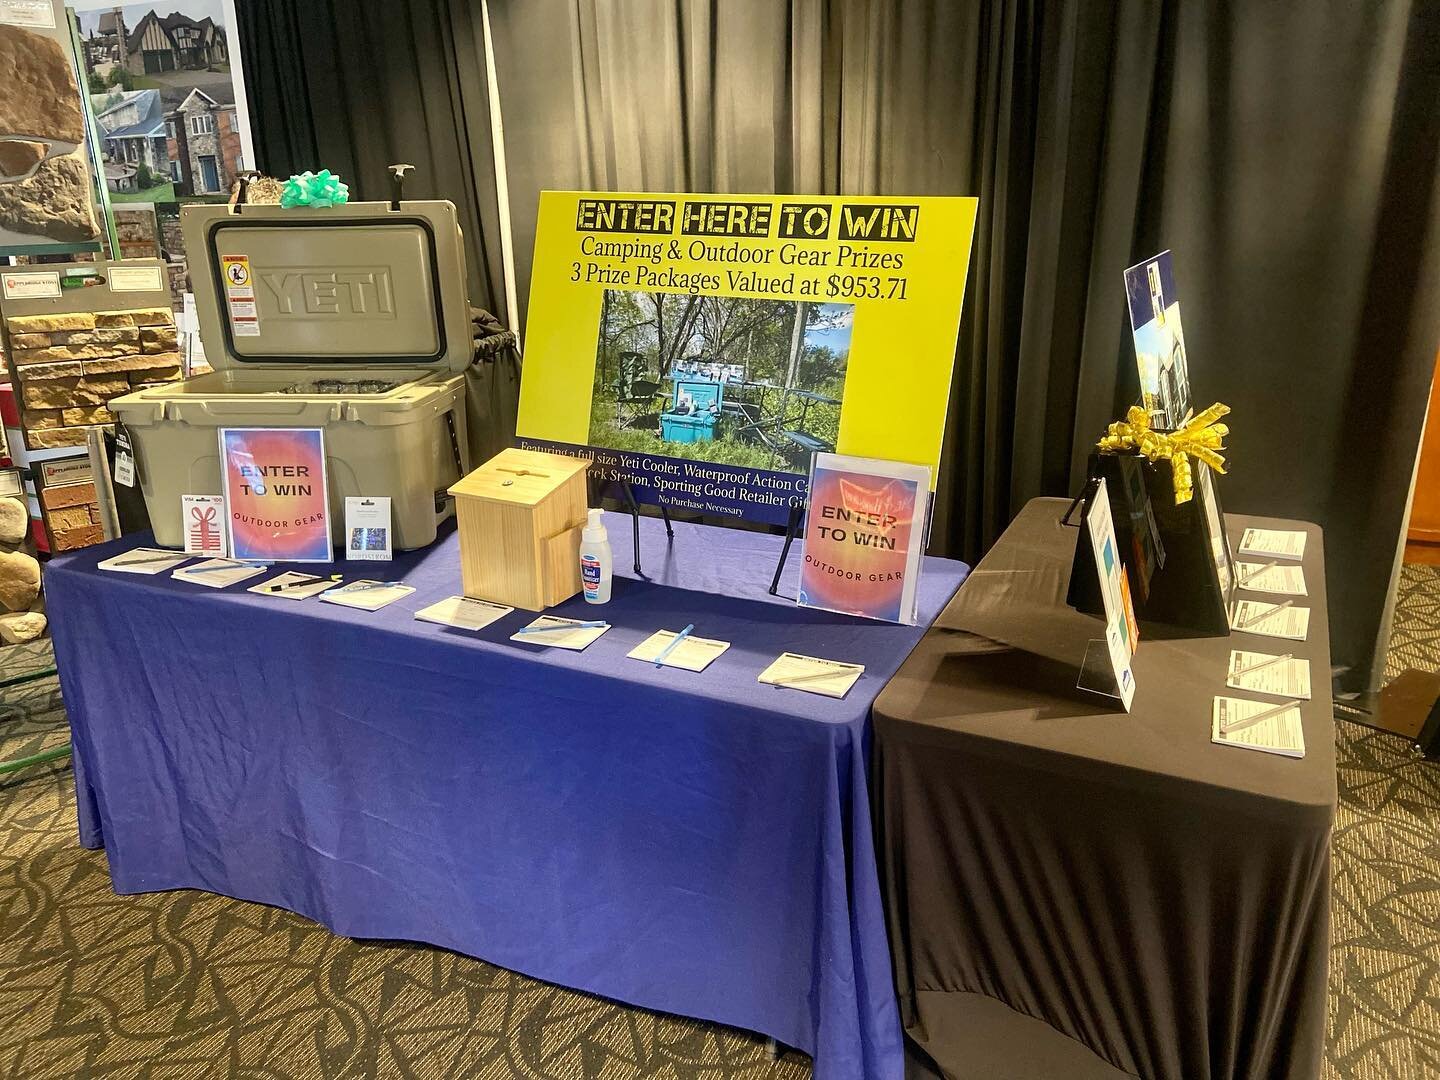 Come visit Mint at the Heinz Field Remodeling Expo this weekend only @heinzfield !⭐️🙌

Browse cabinetry, flooring, countertops, decking and more! Also you can enter in with our client Integrity @integrityconstructionwindows to win a Yeti and camping